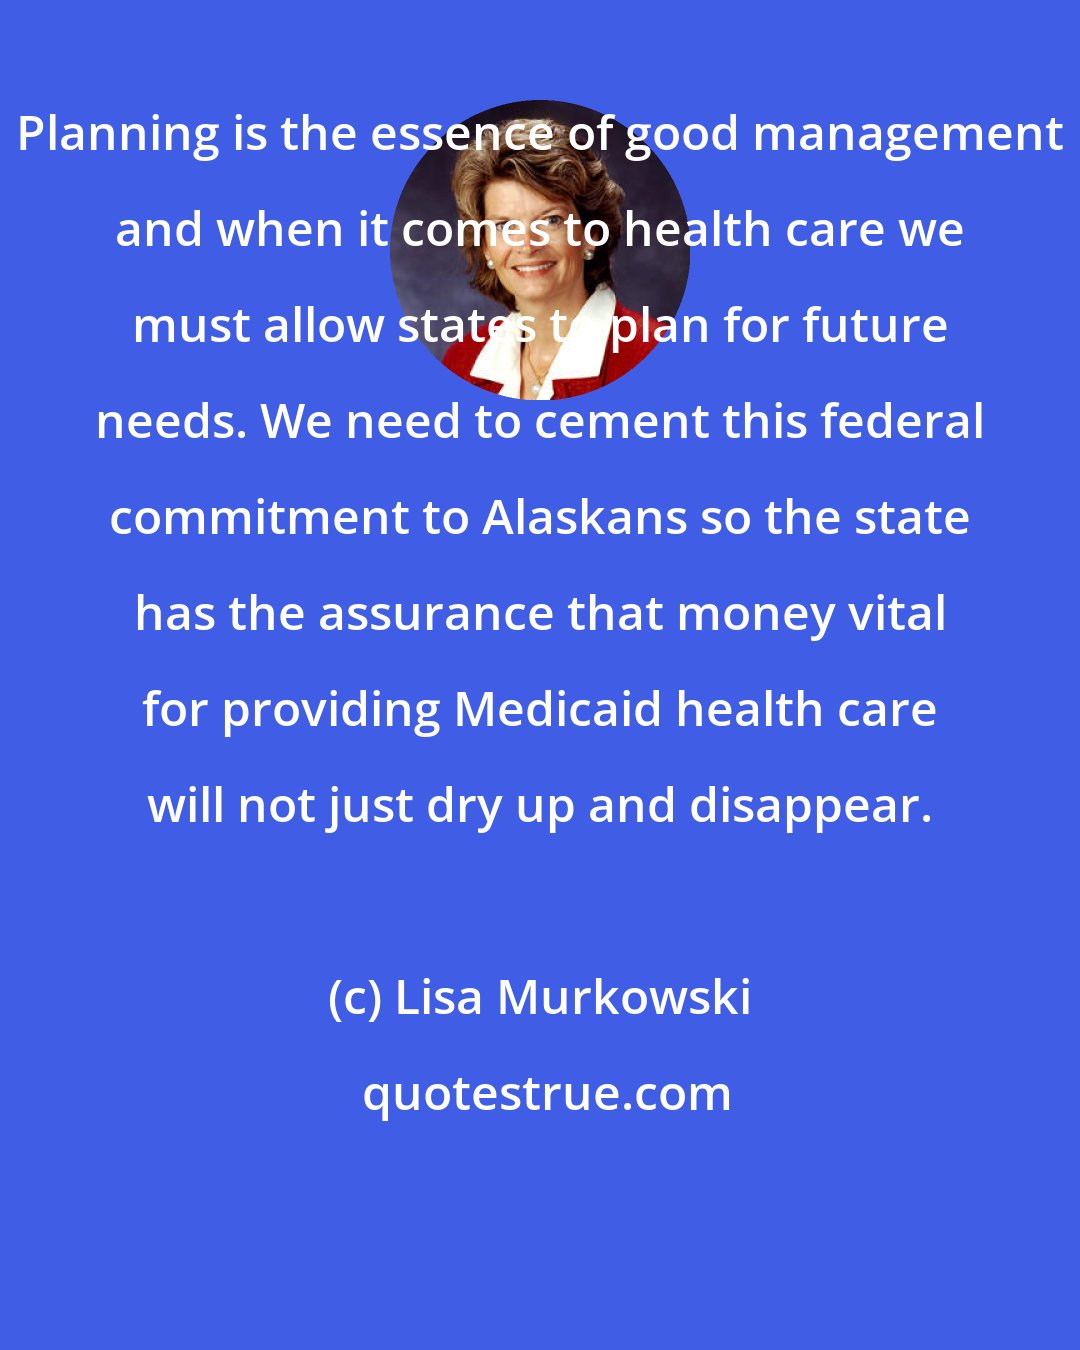 Lisa Murkowski: Planning is the essence of good management and when it comes to health care we must allow states to plan for future needs. We need to cement this federal commitment to Alaskans so the state has the assurance that money vital for providing Medicaid health care will not just dry up and disappear.